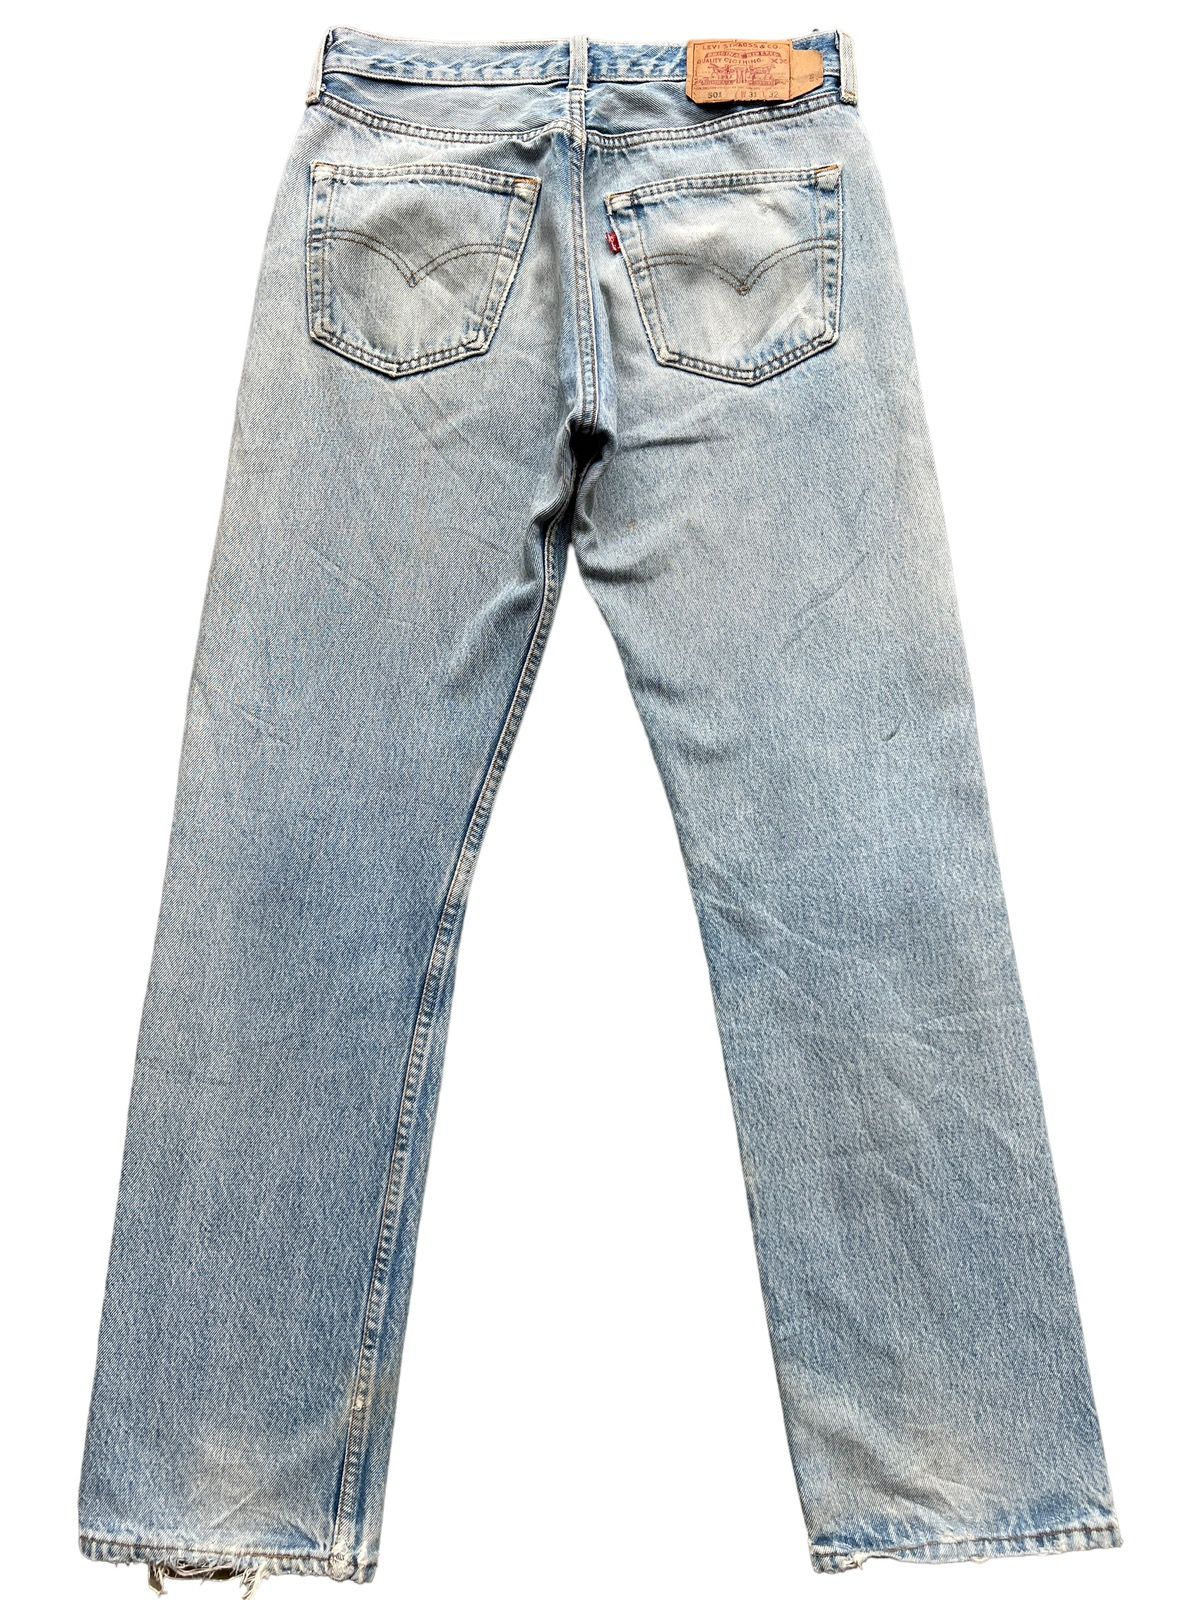 Vintage 90s Levis Distressed Ripped Acid Wash Jeans 31x32 - 2